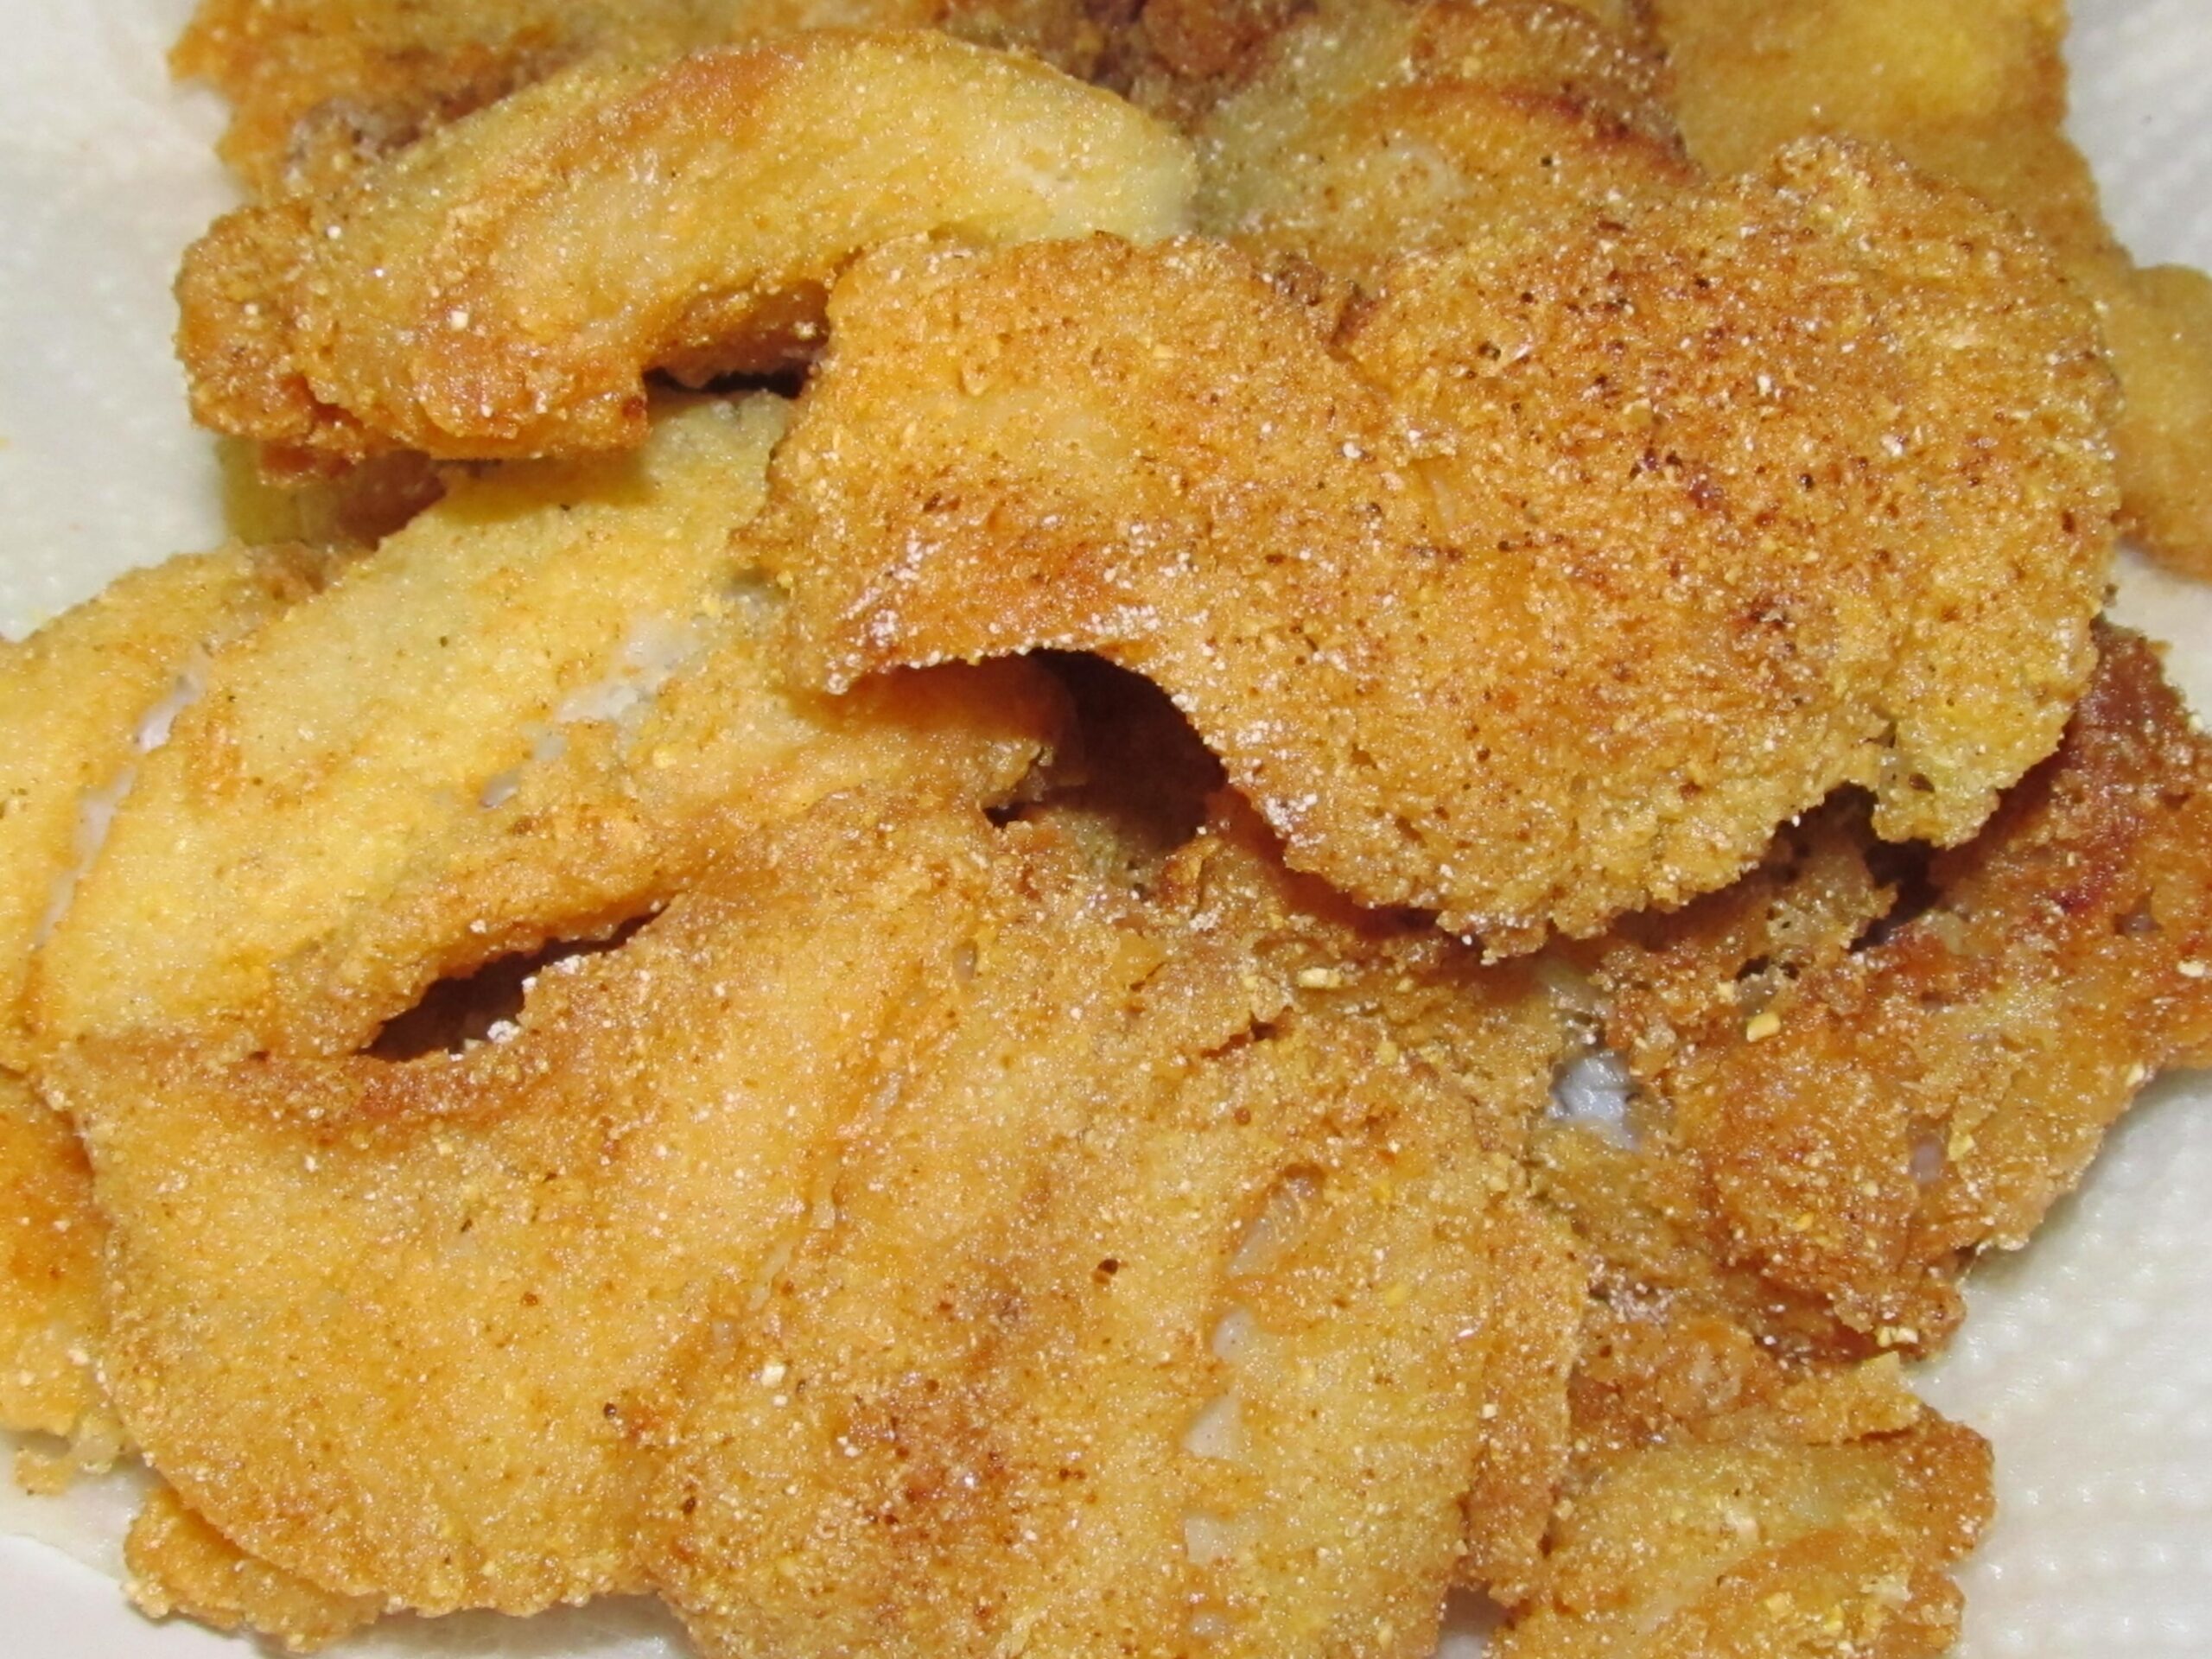  Say goodbye to GMOs and preservatives, and hello to wholesome ingredients in this gluten-free fish fry.